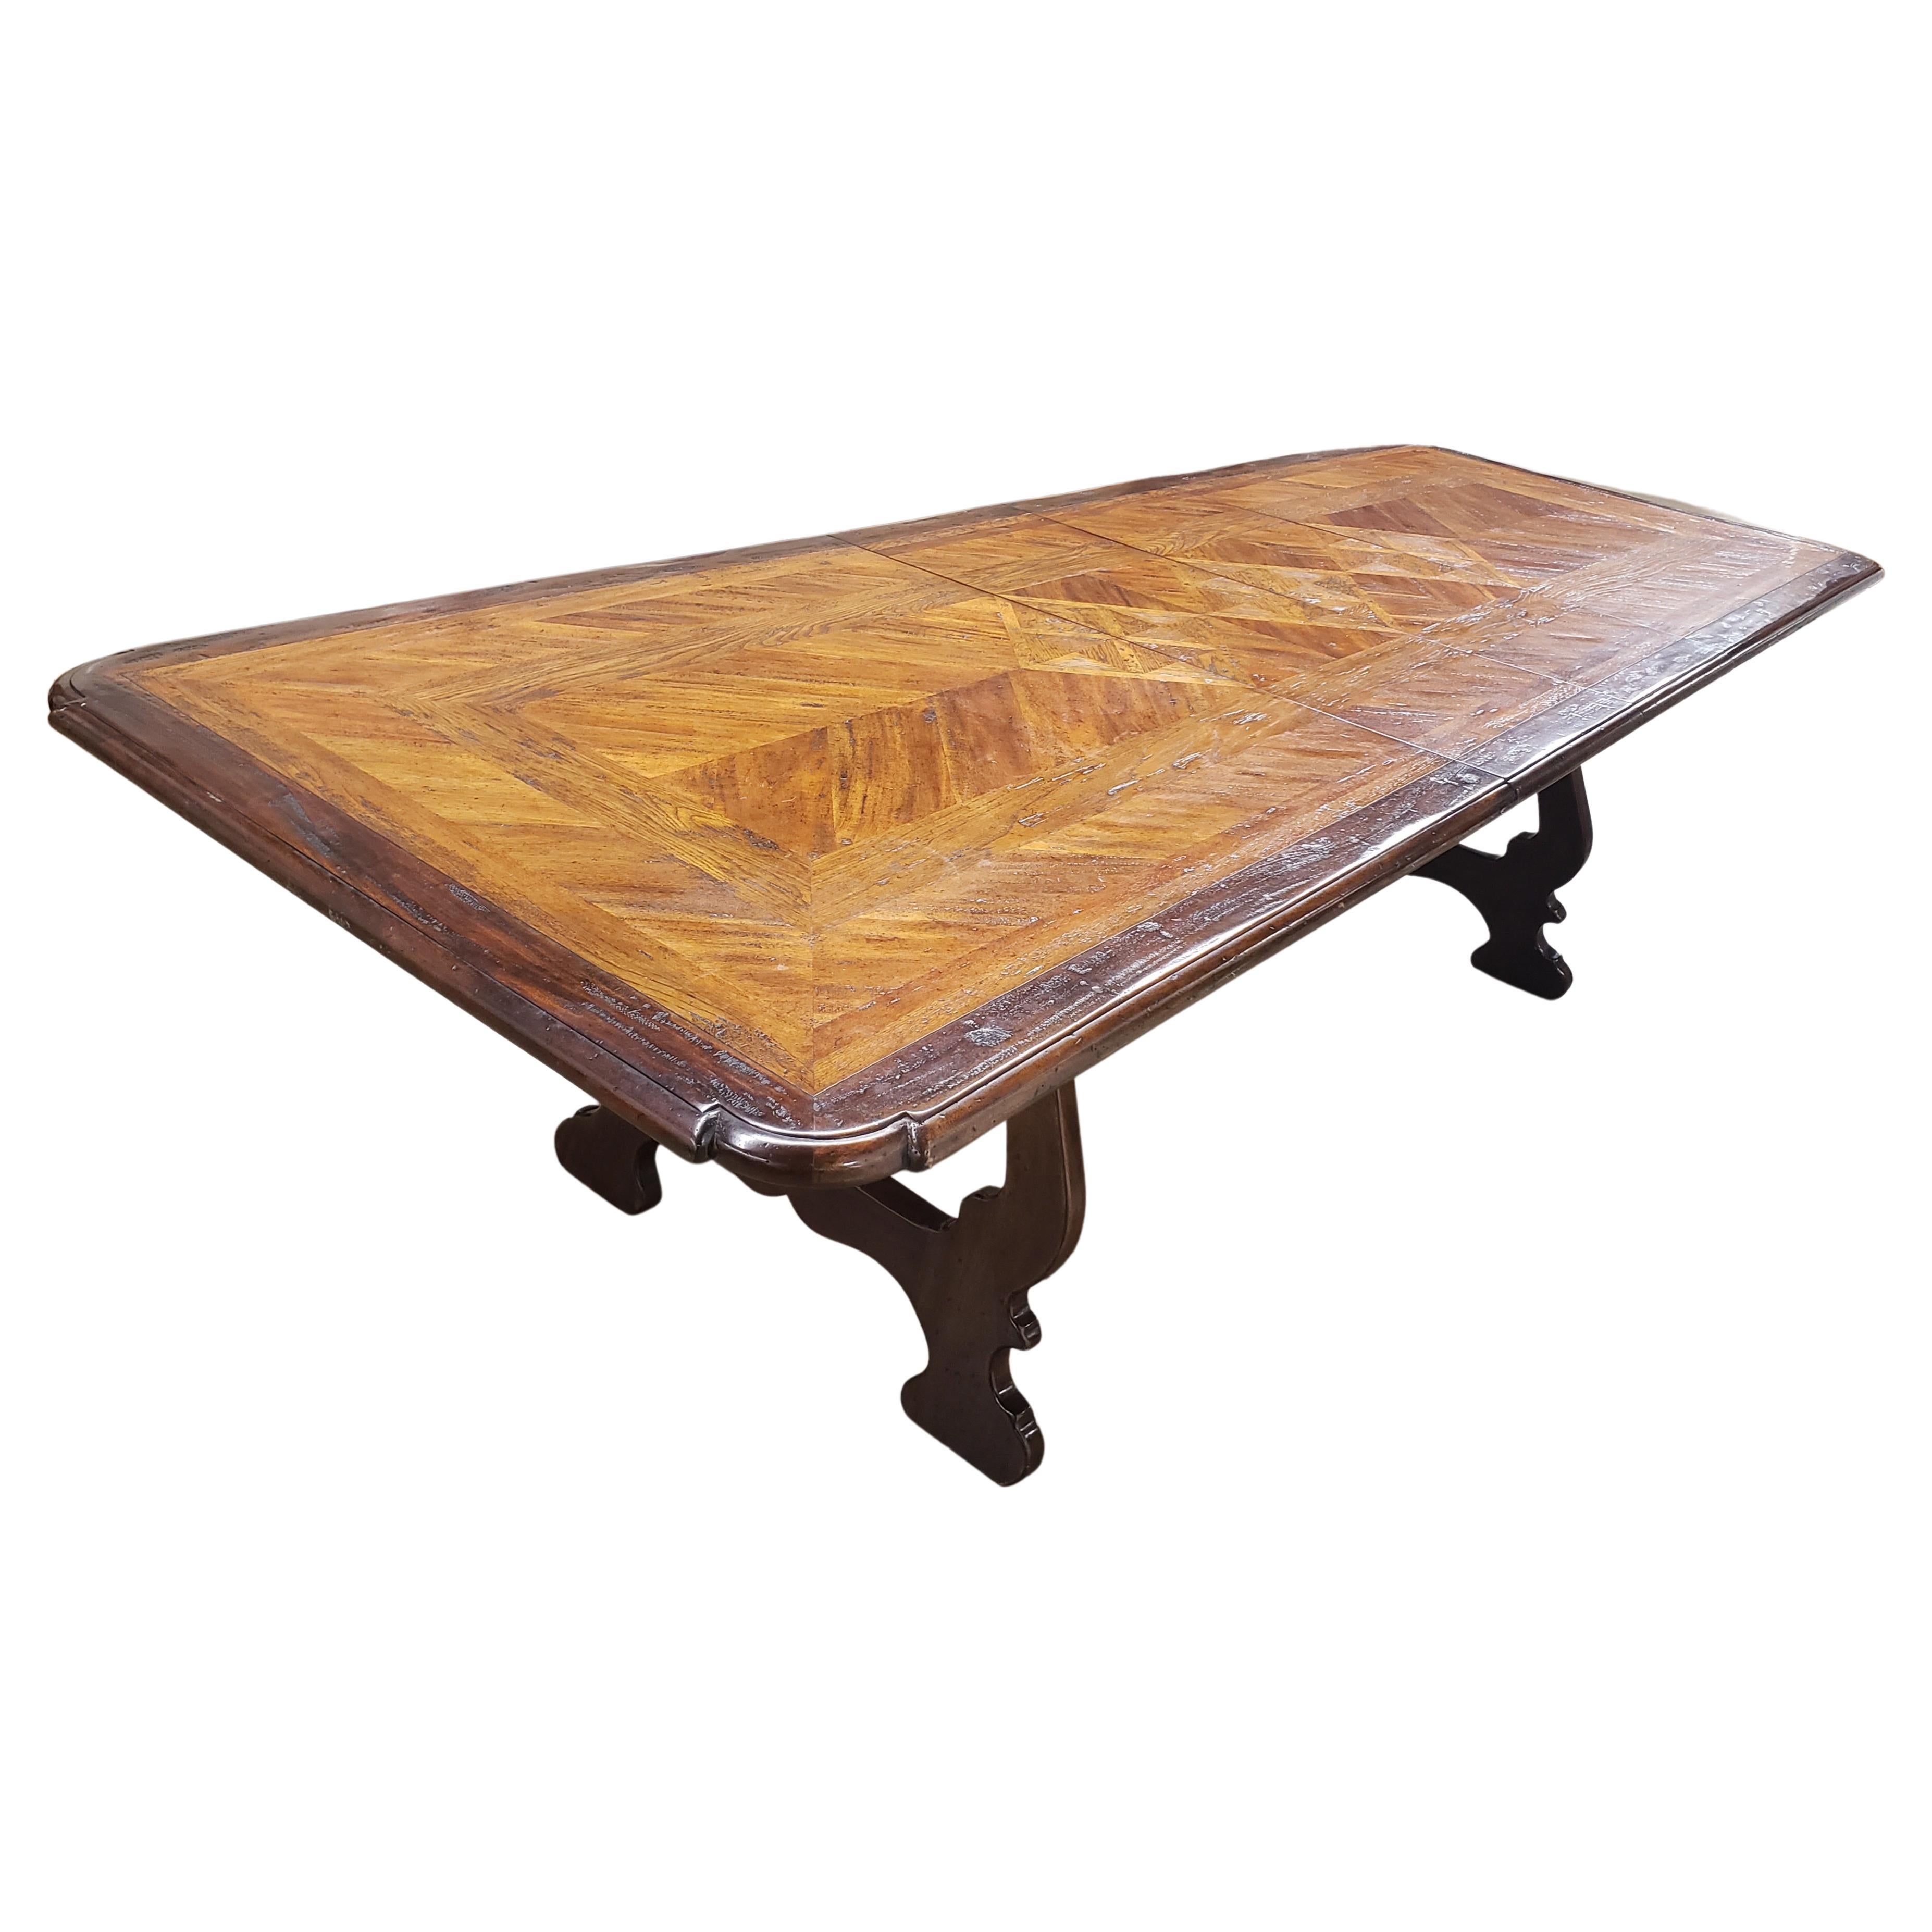 Iron Dennis & Leen Baroque Style Walnut Oak Mahogany Parquetry Trestle Dining Table  For Sale